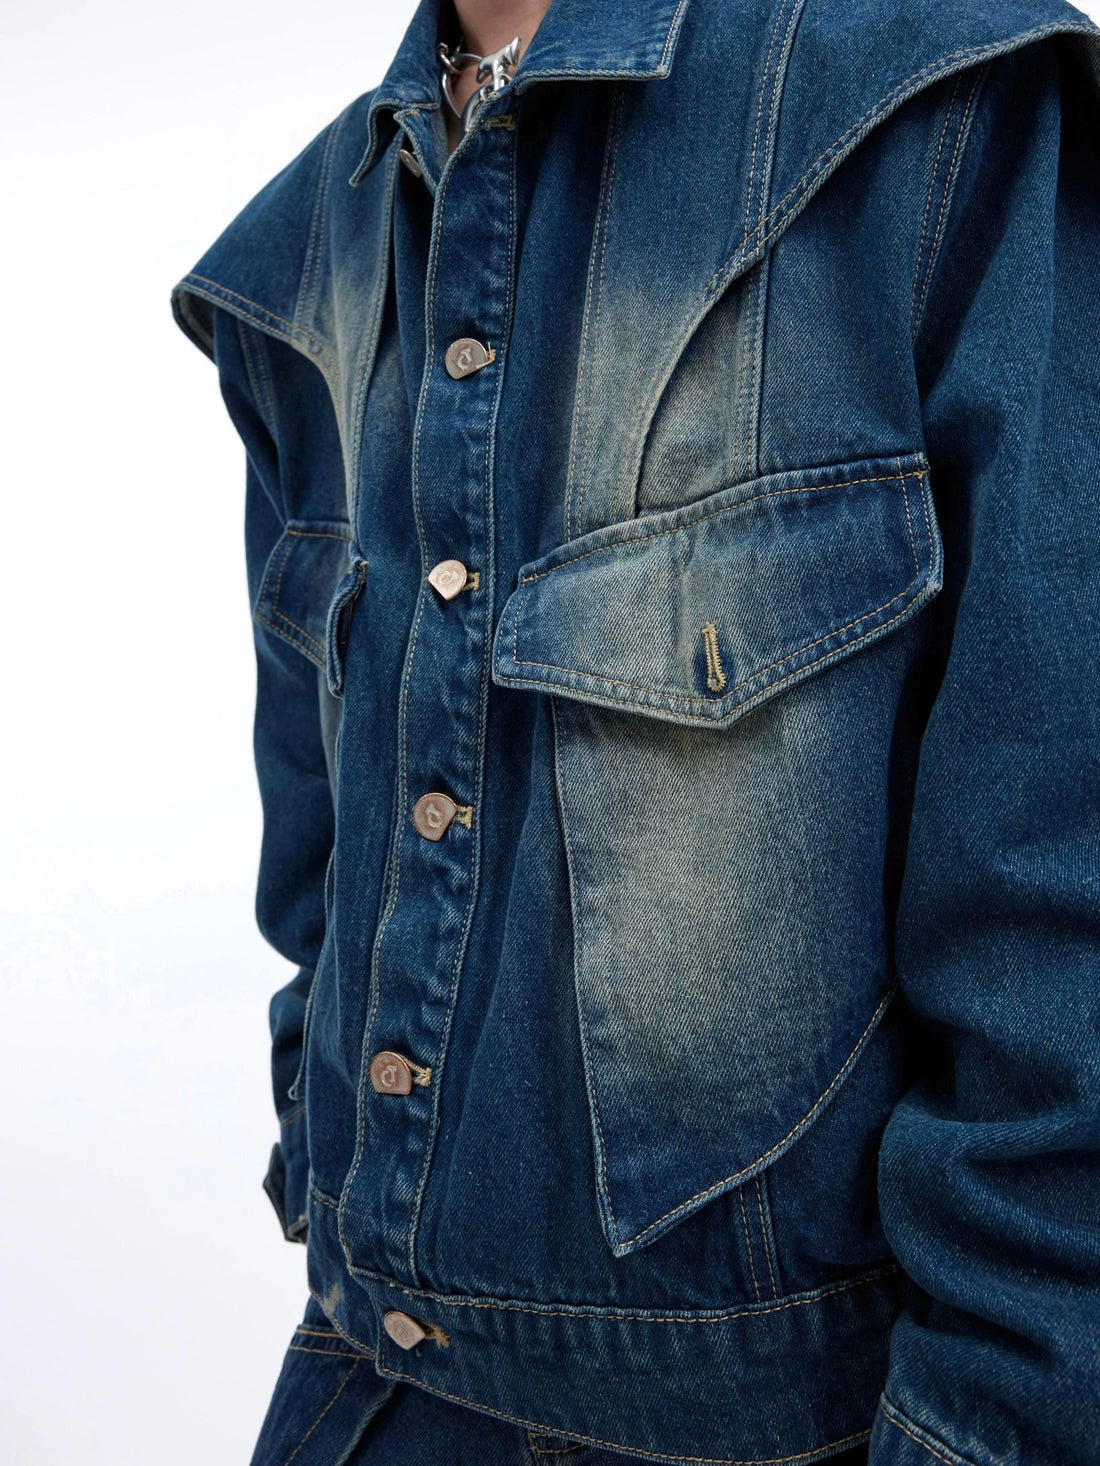 Double-Layer Jeans And Jacket